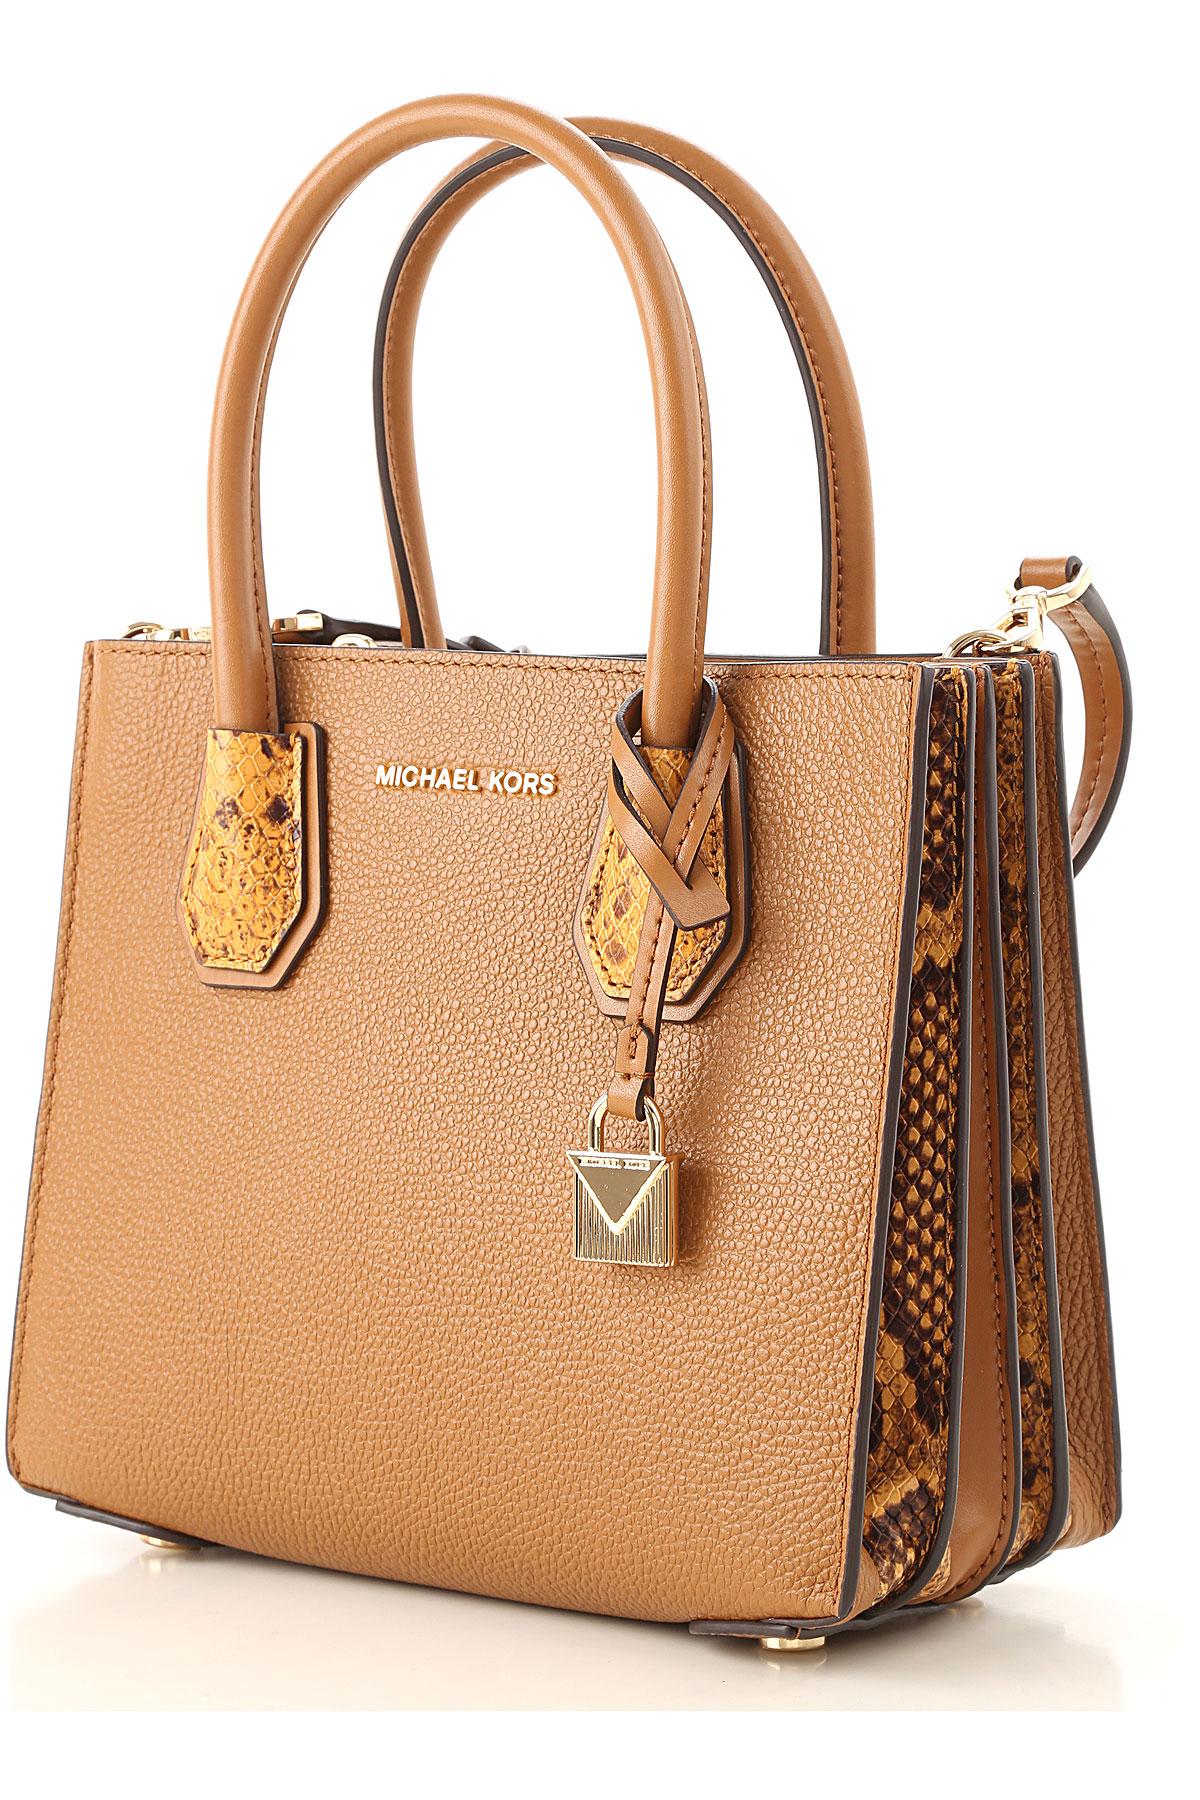 Michael Kors Leather Top Handle Handbag On Sale In Outlet in Brown - Lyst